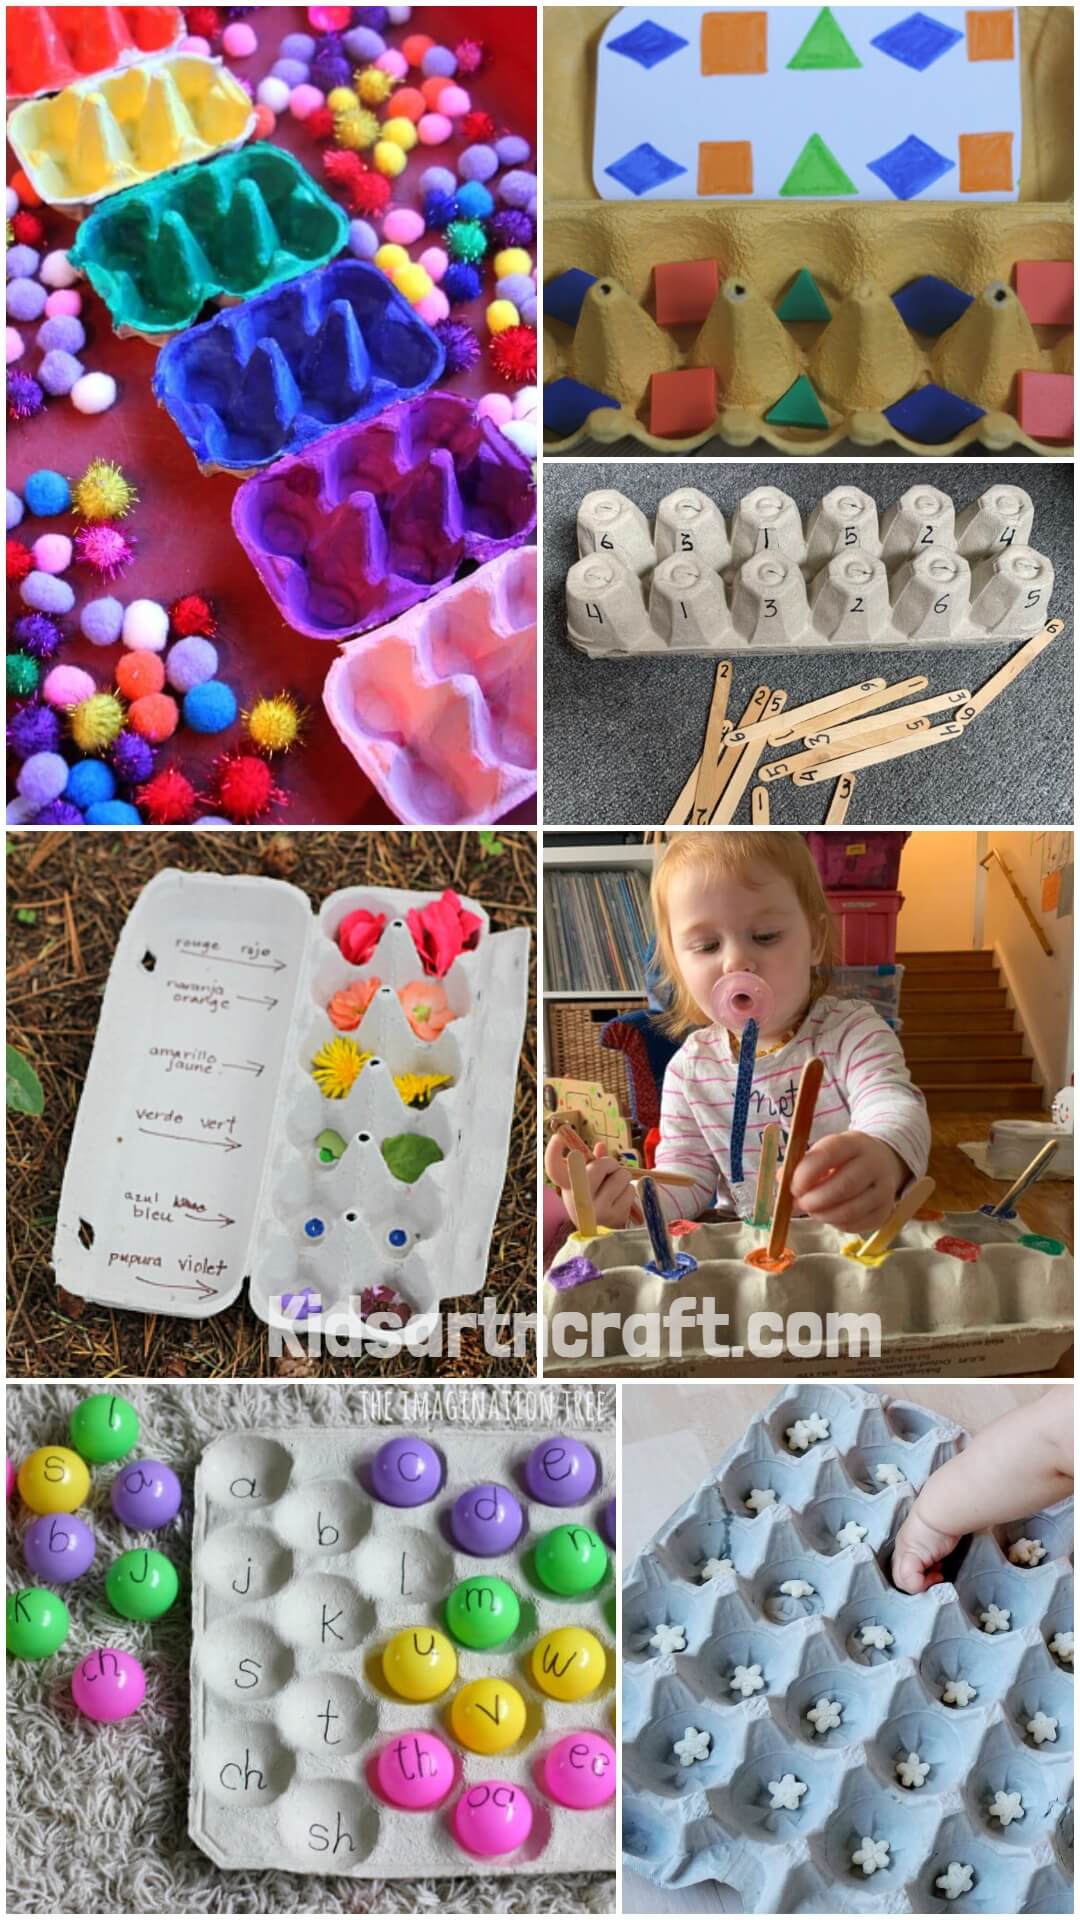 Egg carton crafts for 3 Year's old